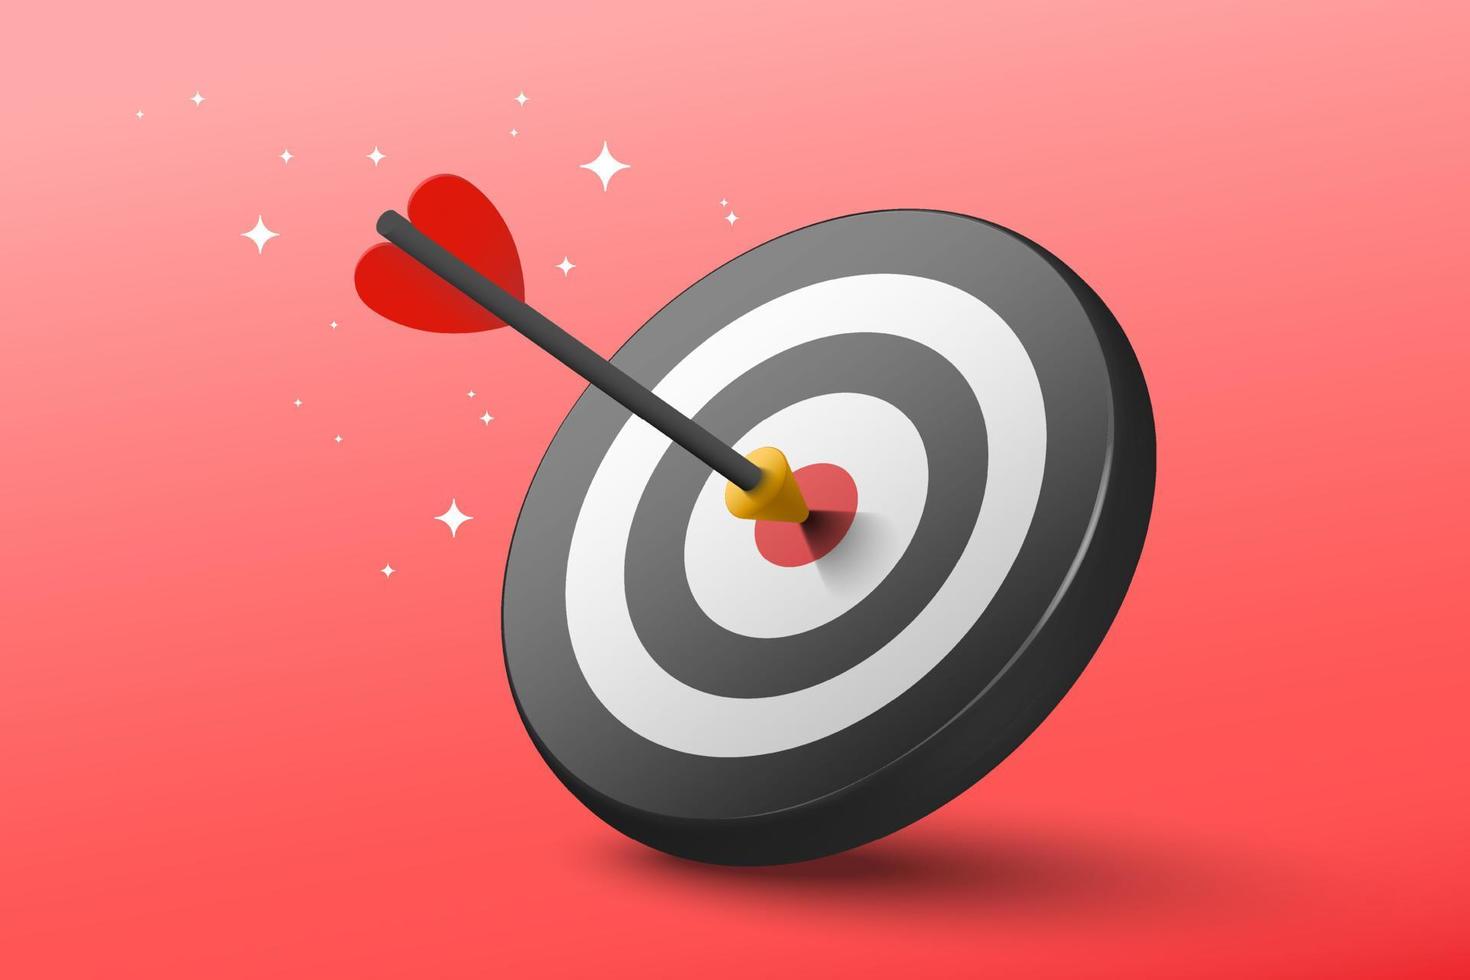 3d Red dart hit to center of dartboard. Arrow on bullseye in target. Business success, investment goal, opportunity challenge, aim strategy, achievement focus concept. 3d realistic vector illustration